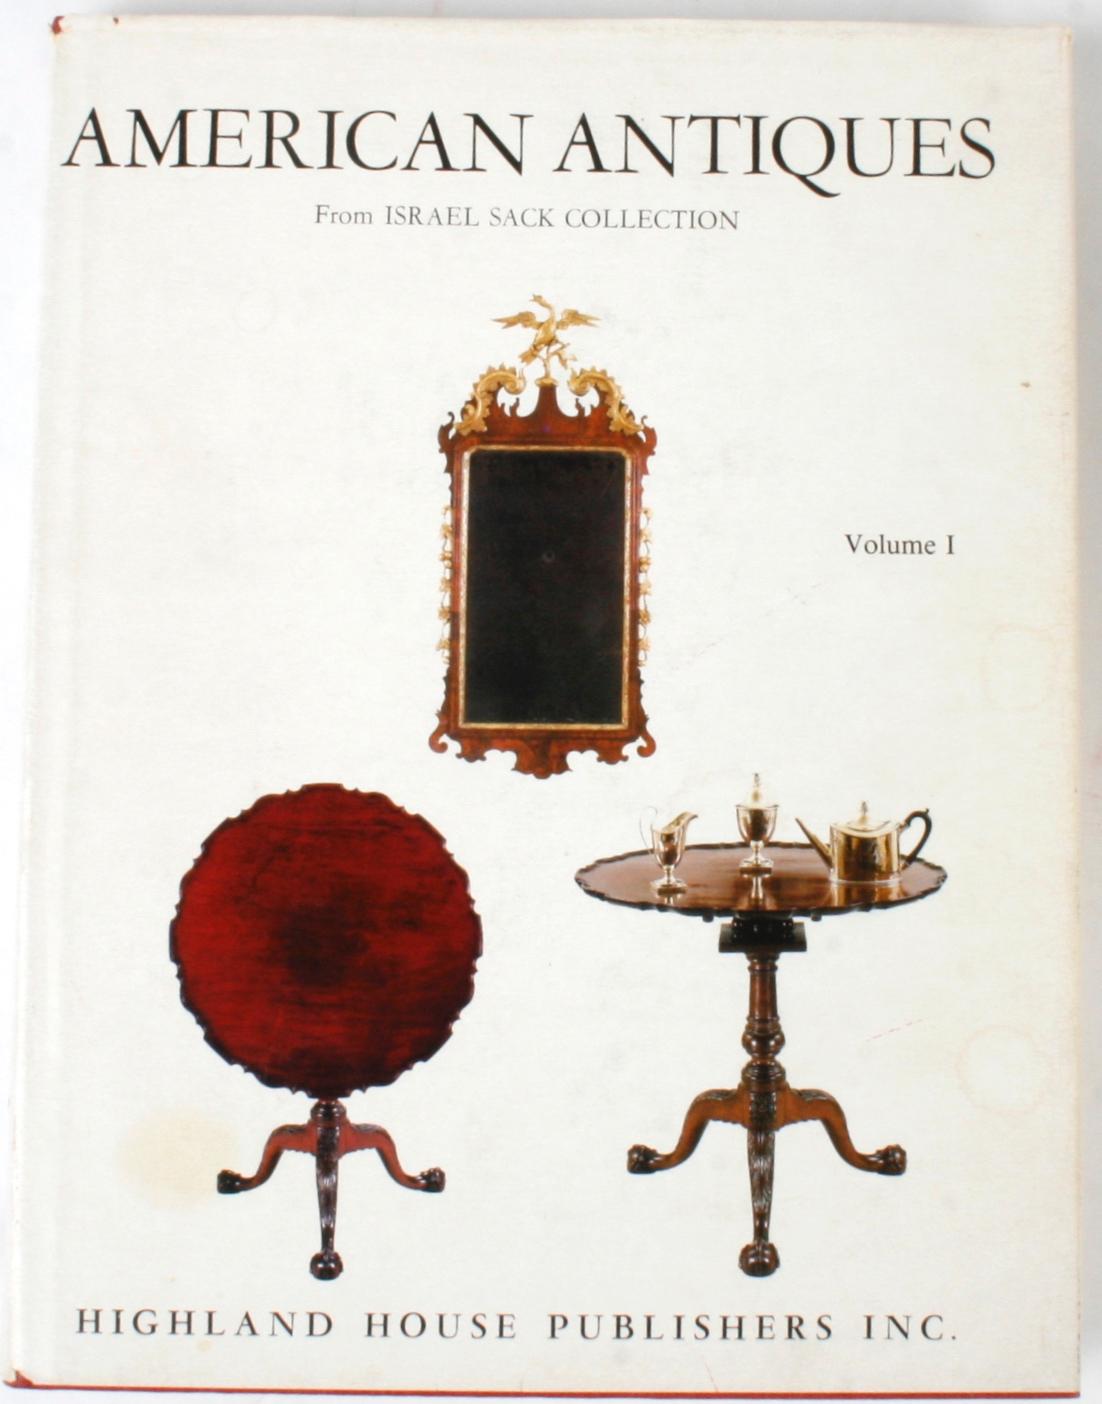 American Antiques From Israel Sack Collection, Volumes I-VI. Washington D.C.: Highland House Publishers, Inc., 1974, 1979, 1981. Hardcovers with dust jackets. 1687 pp. A series of six volumes on American antiques from the Israel Sack Collection.